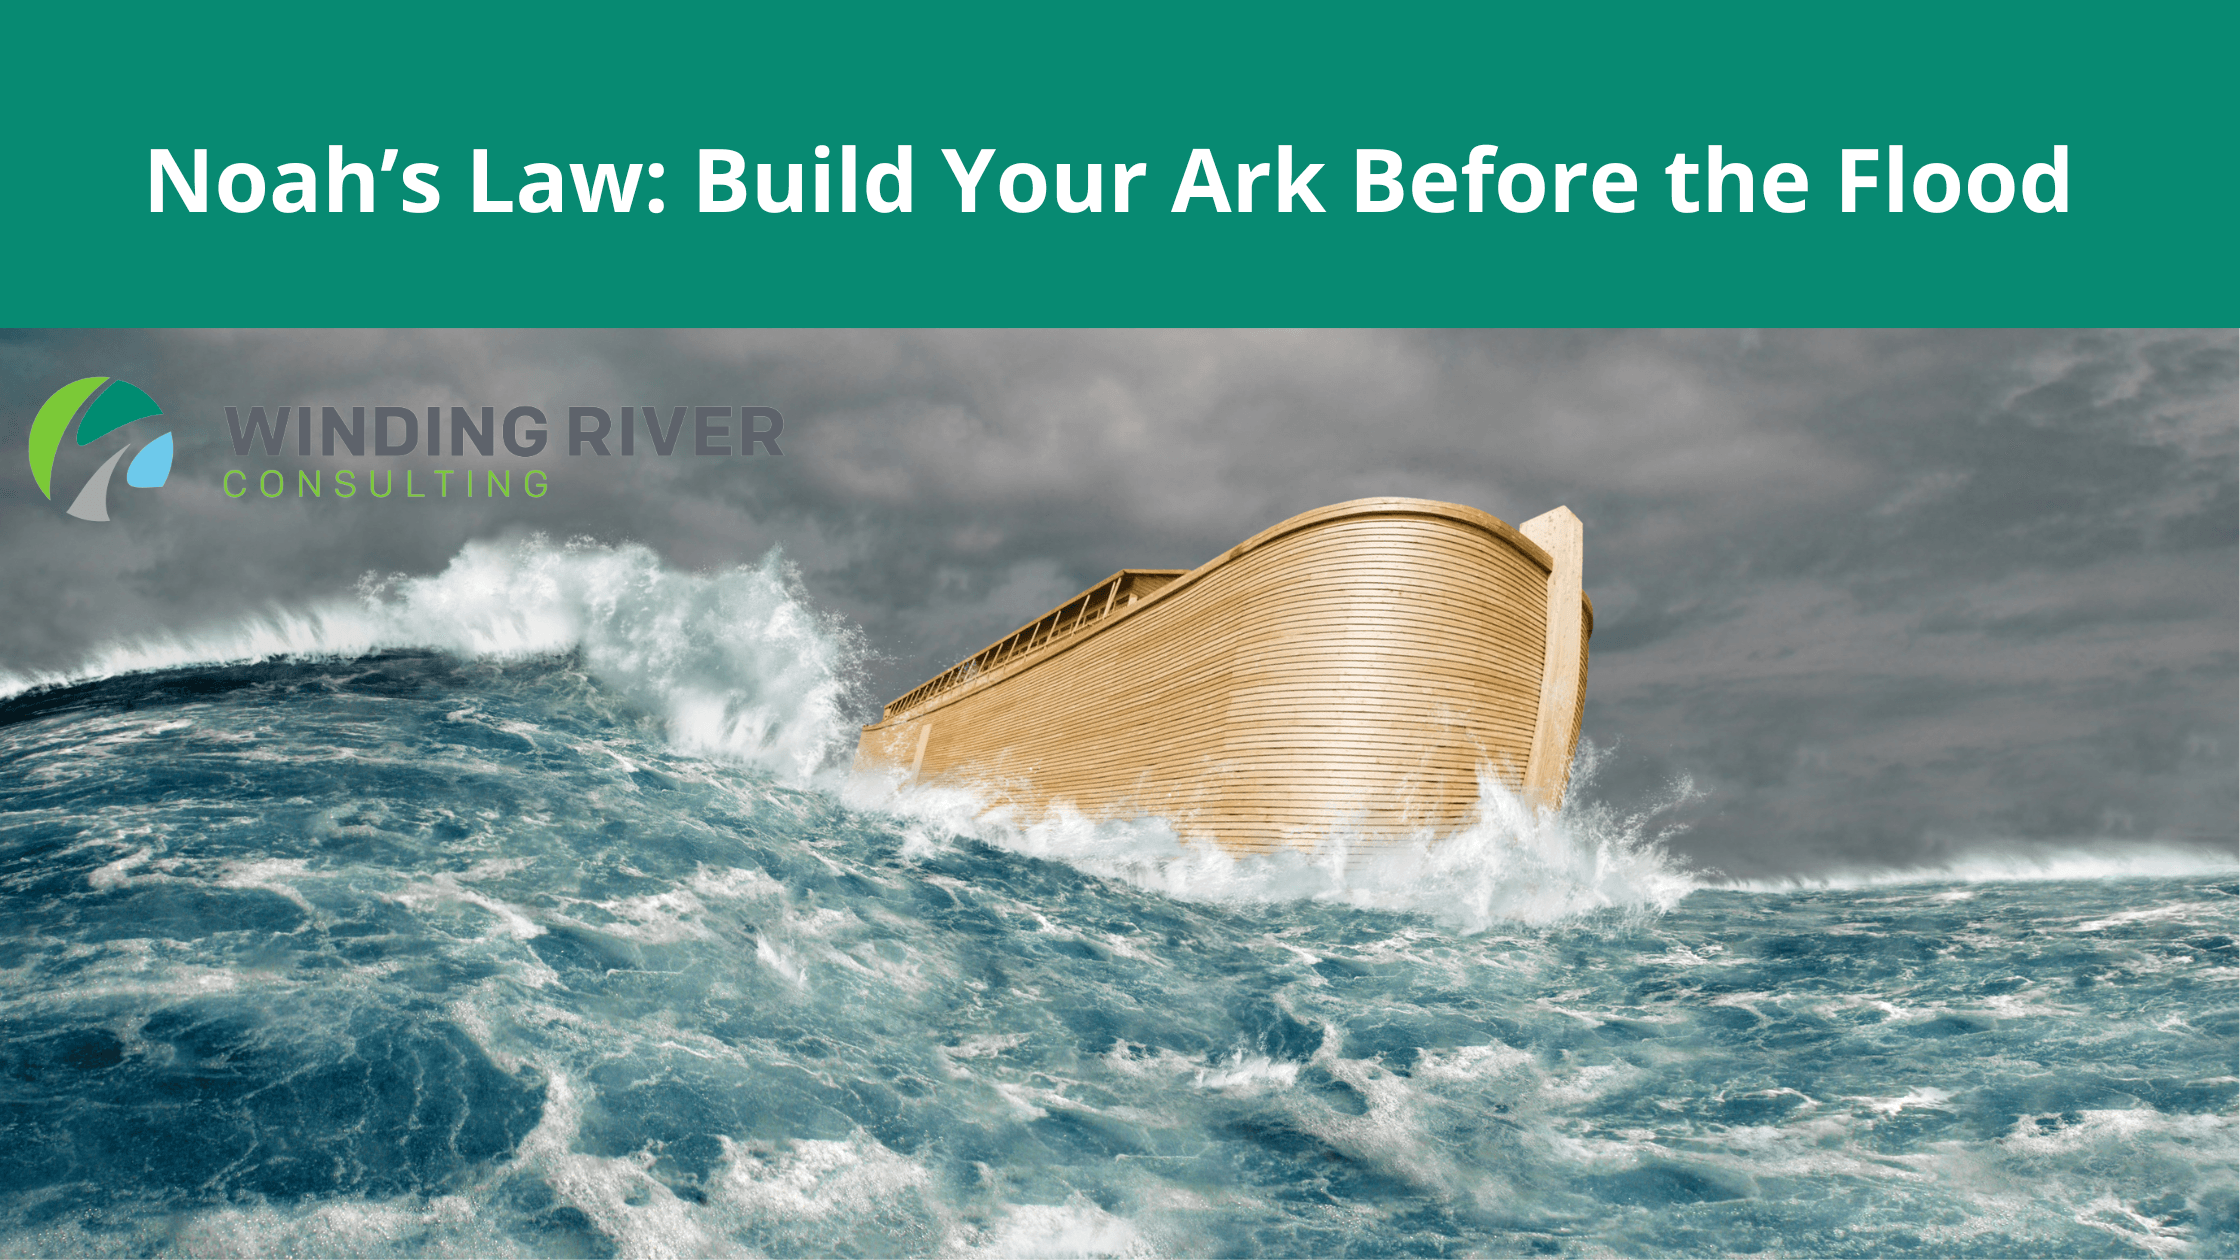 Noah’s Law: Build Your Ark Before the Flood